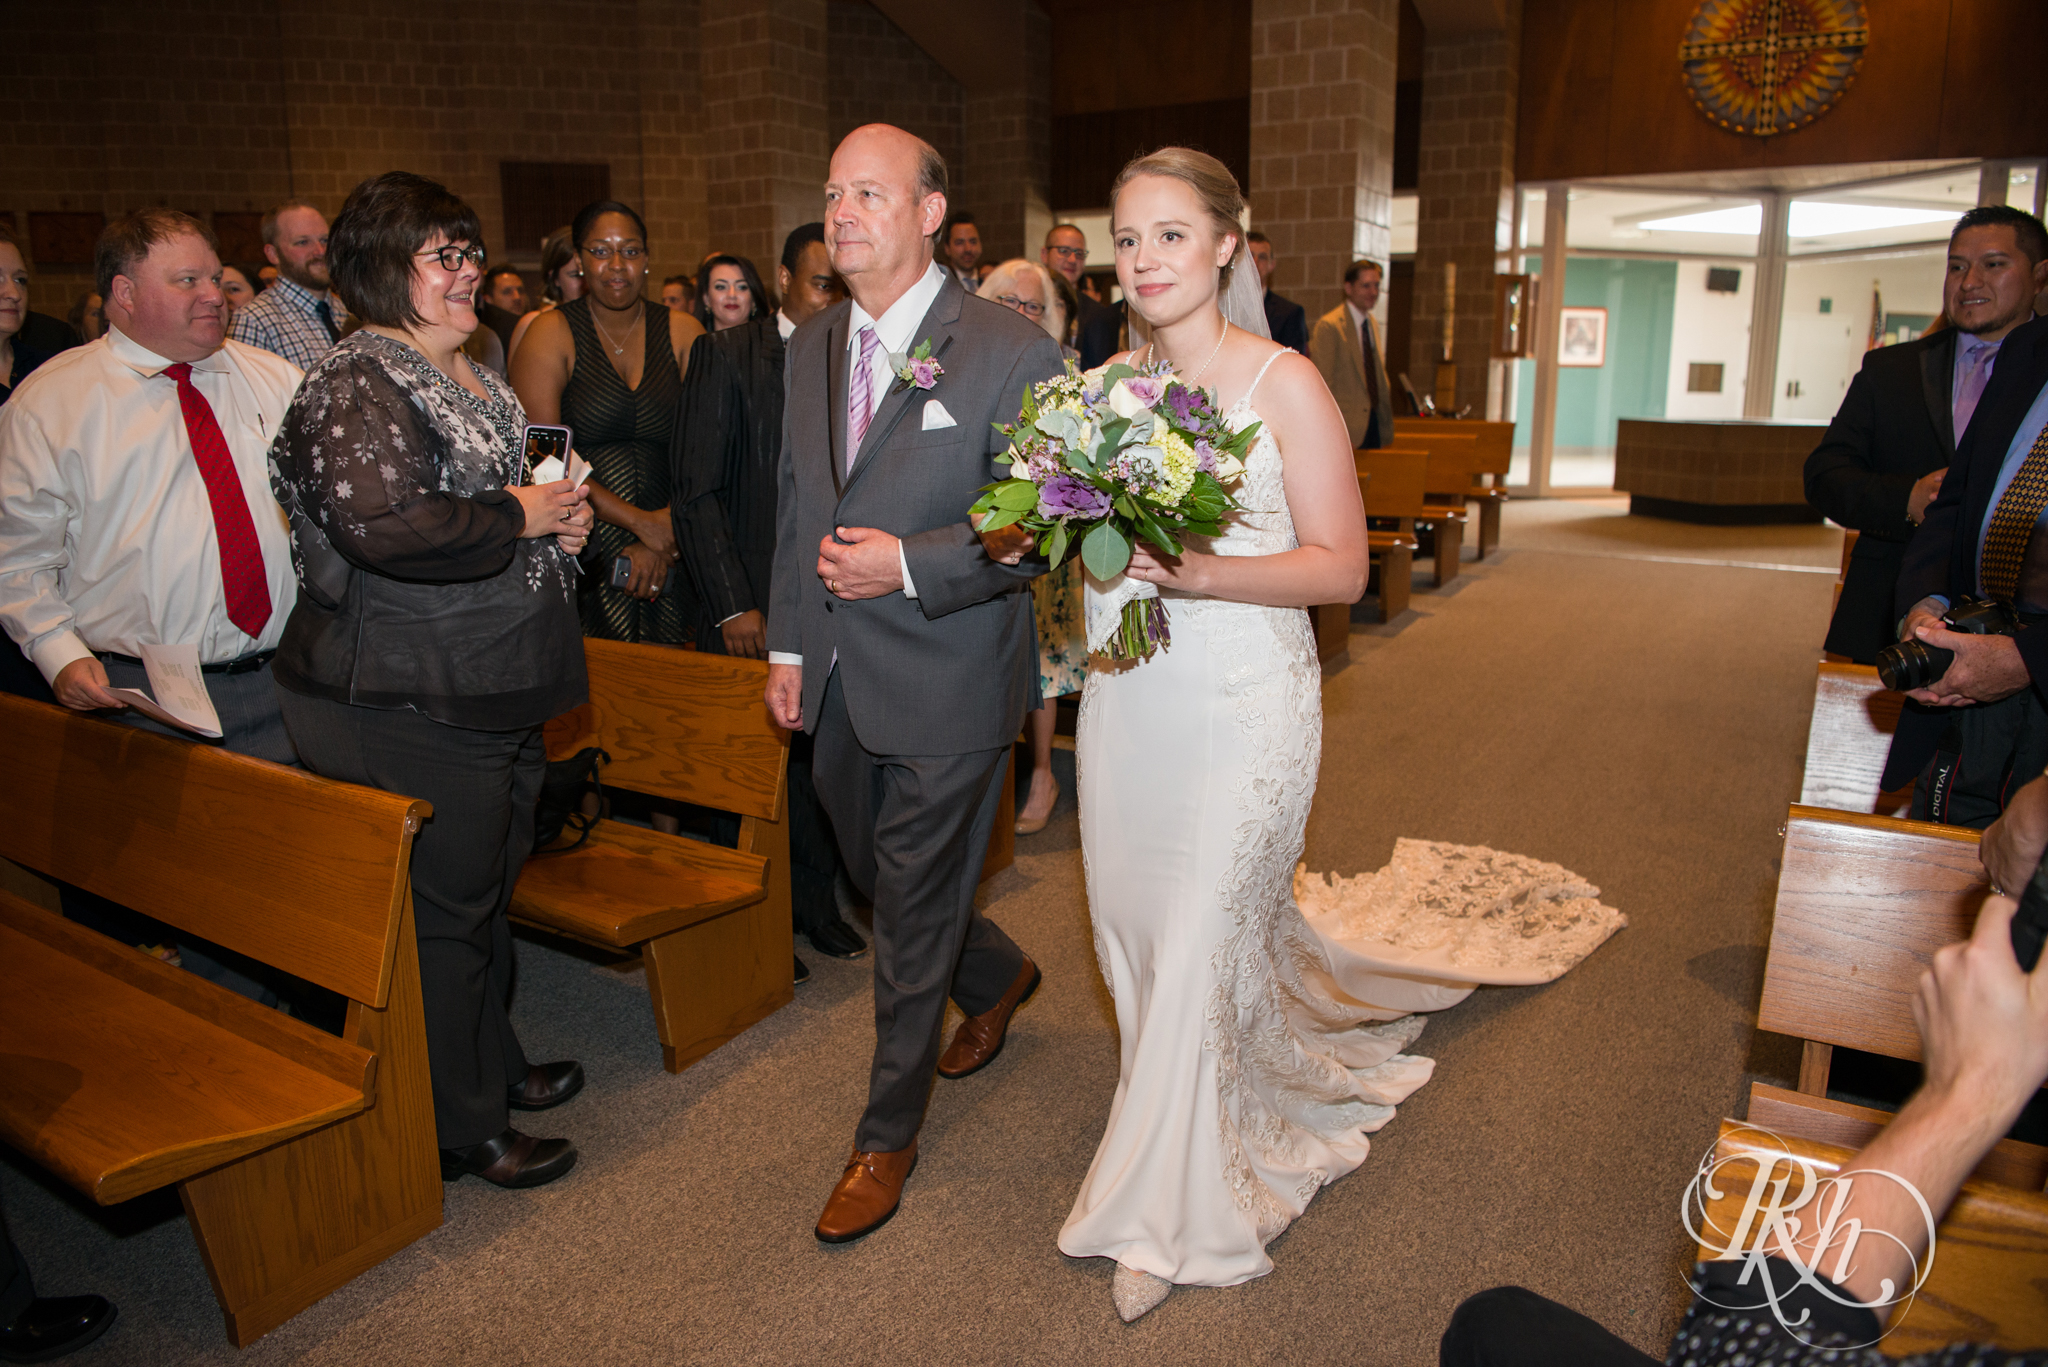 Black walks down the aisle during wedding ceremony at church in Richfield, Minnesota.